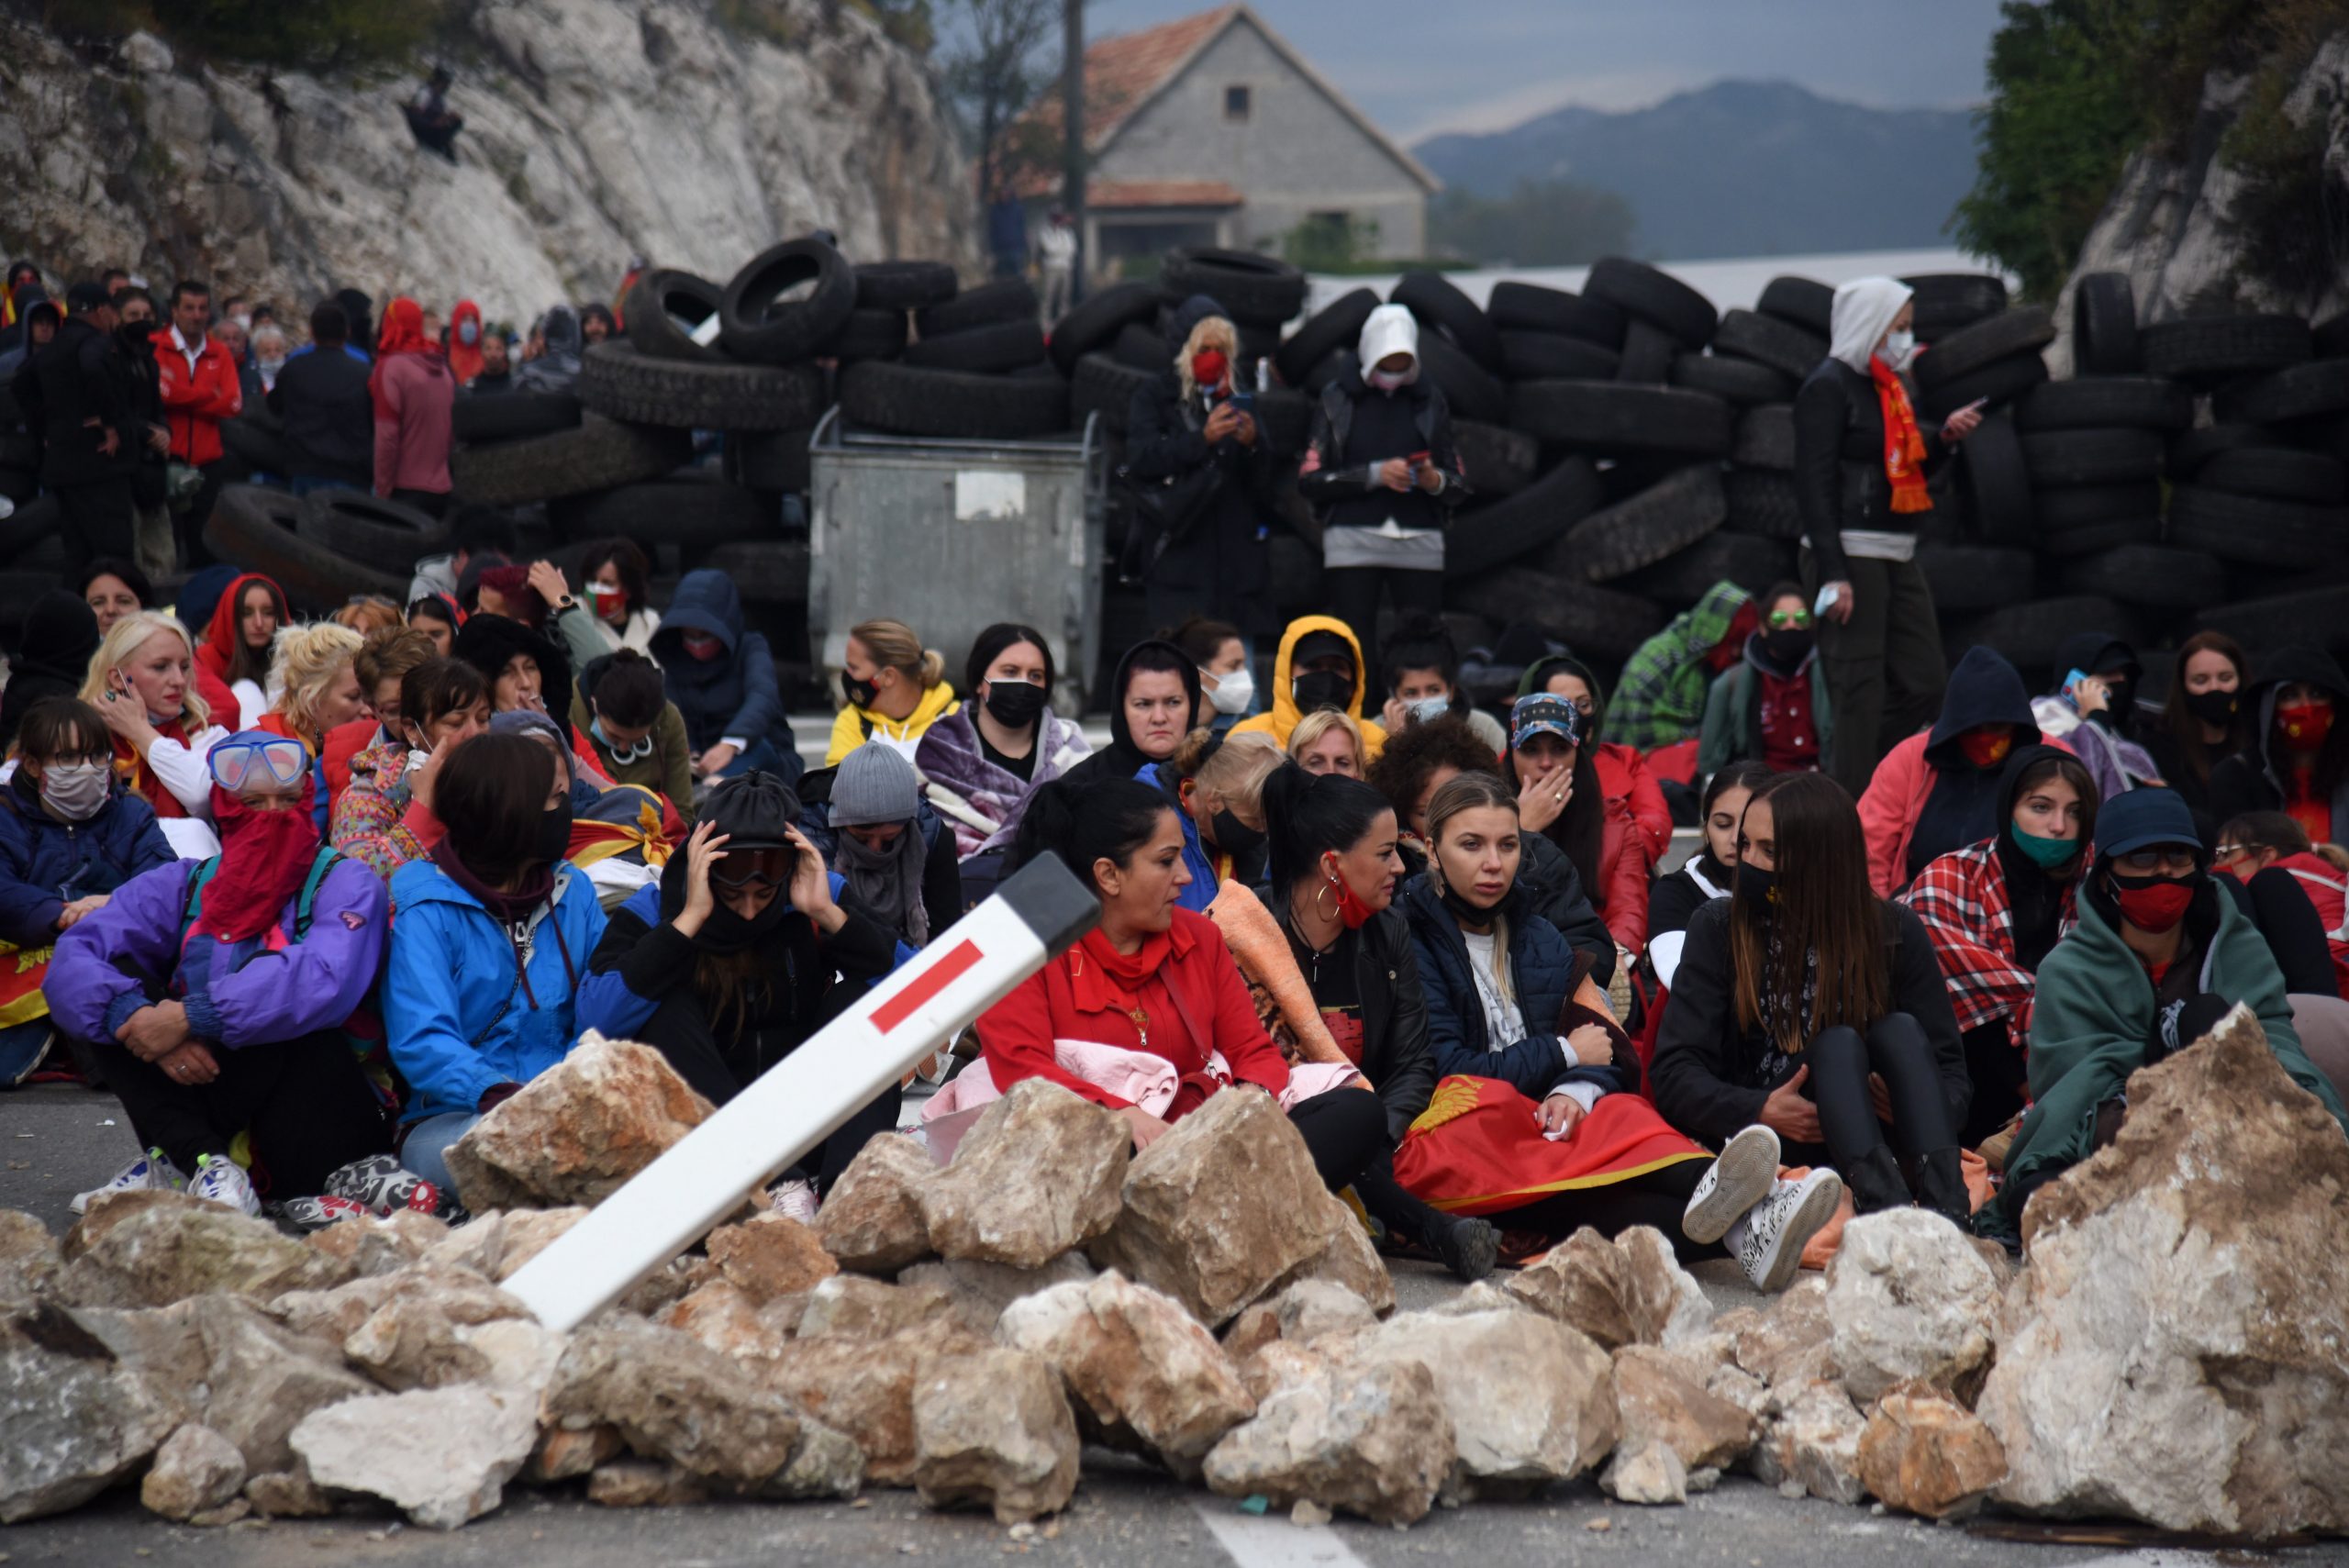 epa09448742 Demonstrators sit at a barricade during a protest against the enthronement of the Serbian Orthodox bishop in Cetinje, Montenegro, 05 September 2021. The enthronement of the new bishop of the Serbian Orthodox Church in Montenegro is causing a divide in Montenegro, sparking tensions between the members of the Serbian orthodox church and protestors who are opposing the ceremony taking place in the former Montenegrin royal capital.  EPA/BORIS PEJOVIC